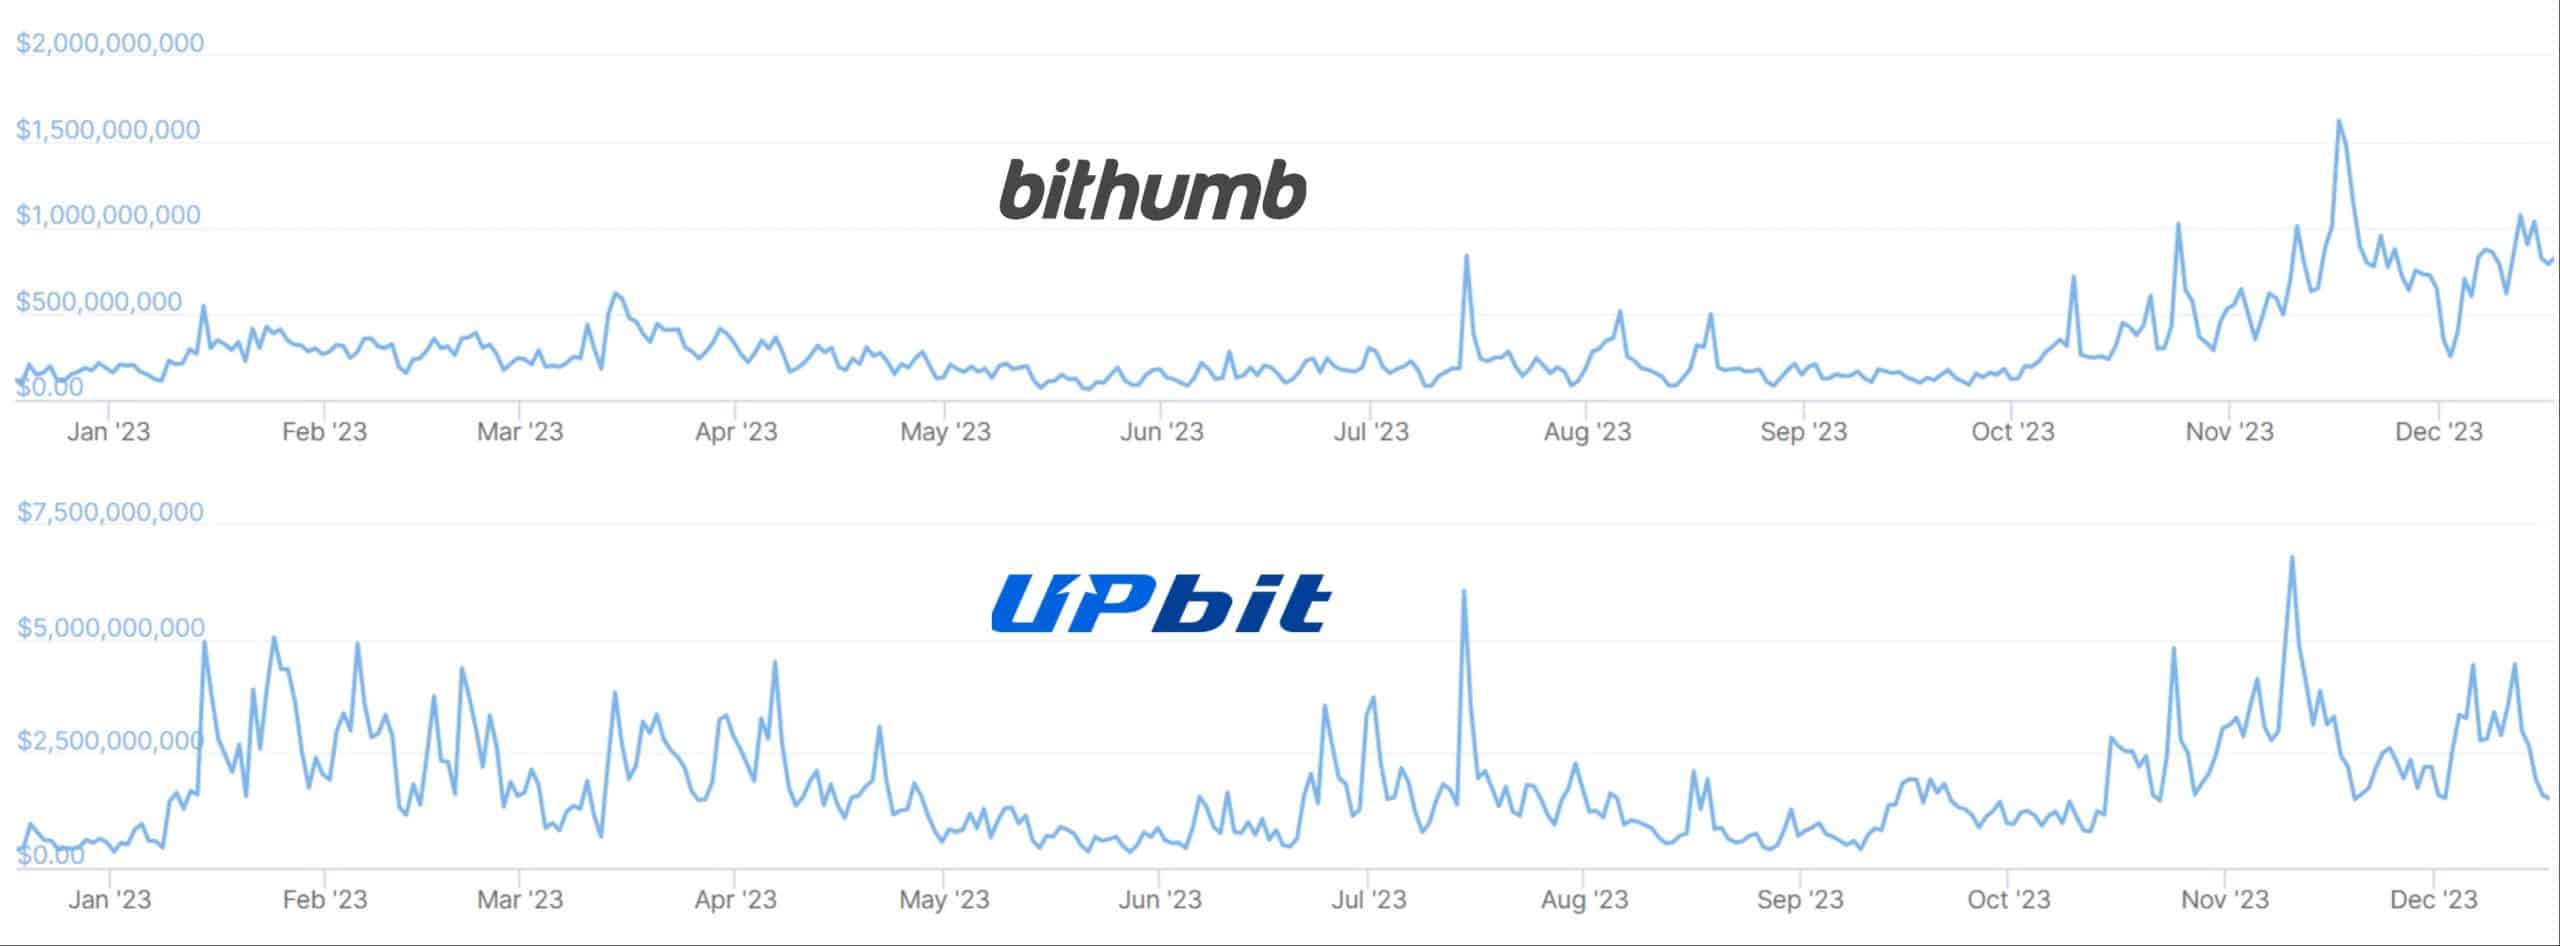 Graphs showing one-year trading volumes on the Bithumb and Upbit crypto exchanges.